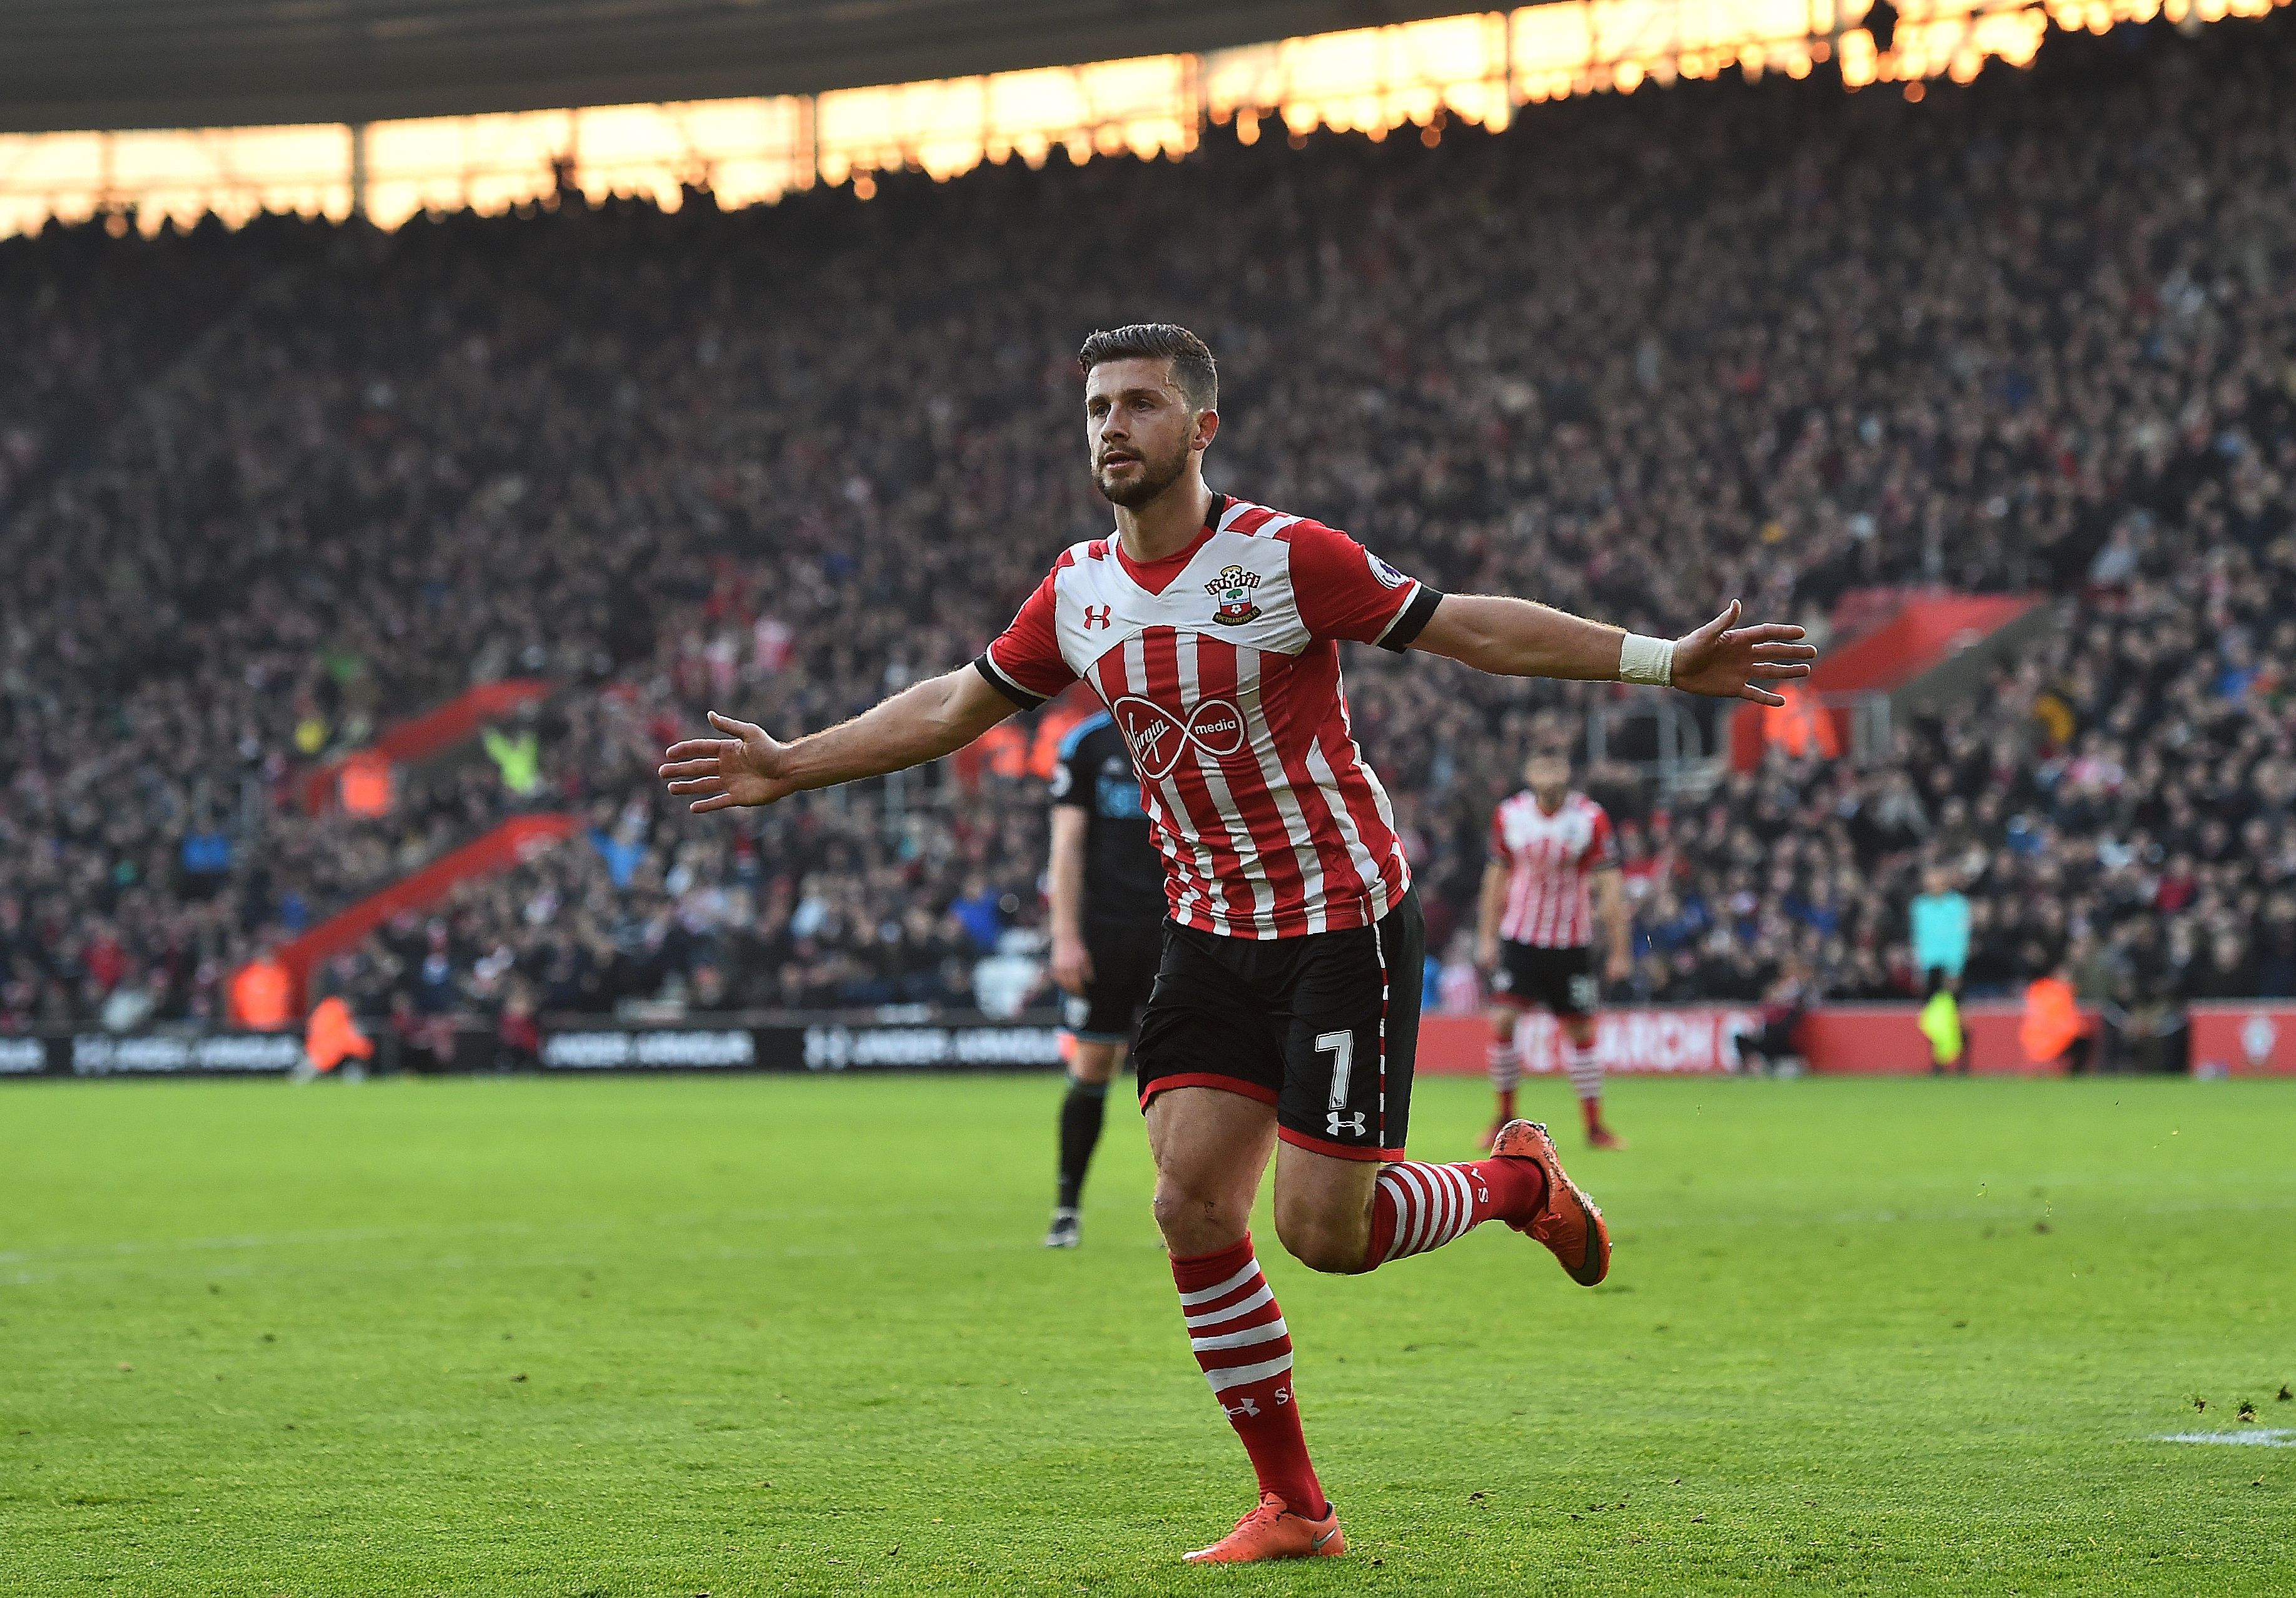 Southampton's Irish striker Shane Long celebrates scoring his team's first goal during the English Premier League football match between Southampton and West Bromwich Albion at St Mary's Stadium in Southampton, southern England on December 31, 2016. / AFP / Glyn KIRK / RESTRICTED TO EDITORIAL USE. No use with unauthorized audio, video, data, fixture lists, club/league logos or 'live' services. Online in-match use limited to 75 images, no video emulation. No use in betting, games or single club/league/player publications.  /         (Photo credit should read GLYN KIRK/AFP/Getty Images)